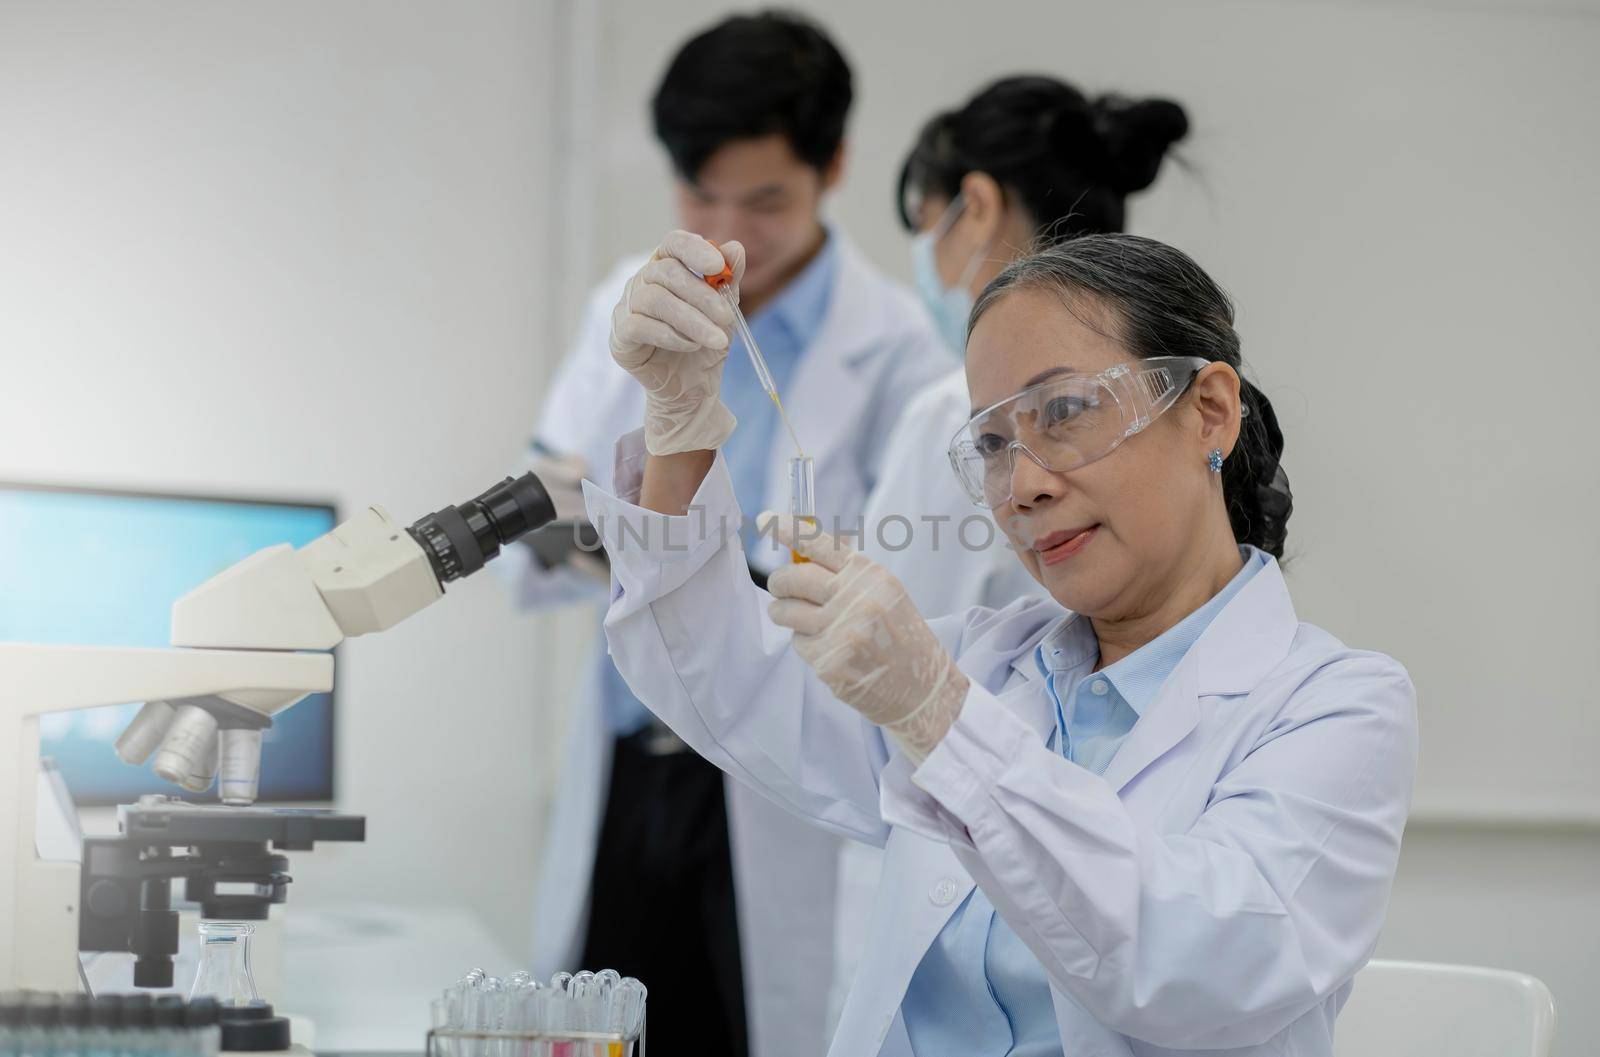 Health care researchers working in life science laboratory. Young female research scientist and senior male supervisor preparing and analyzing microscope slides in research lab..